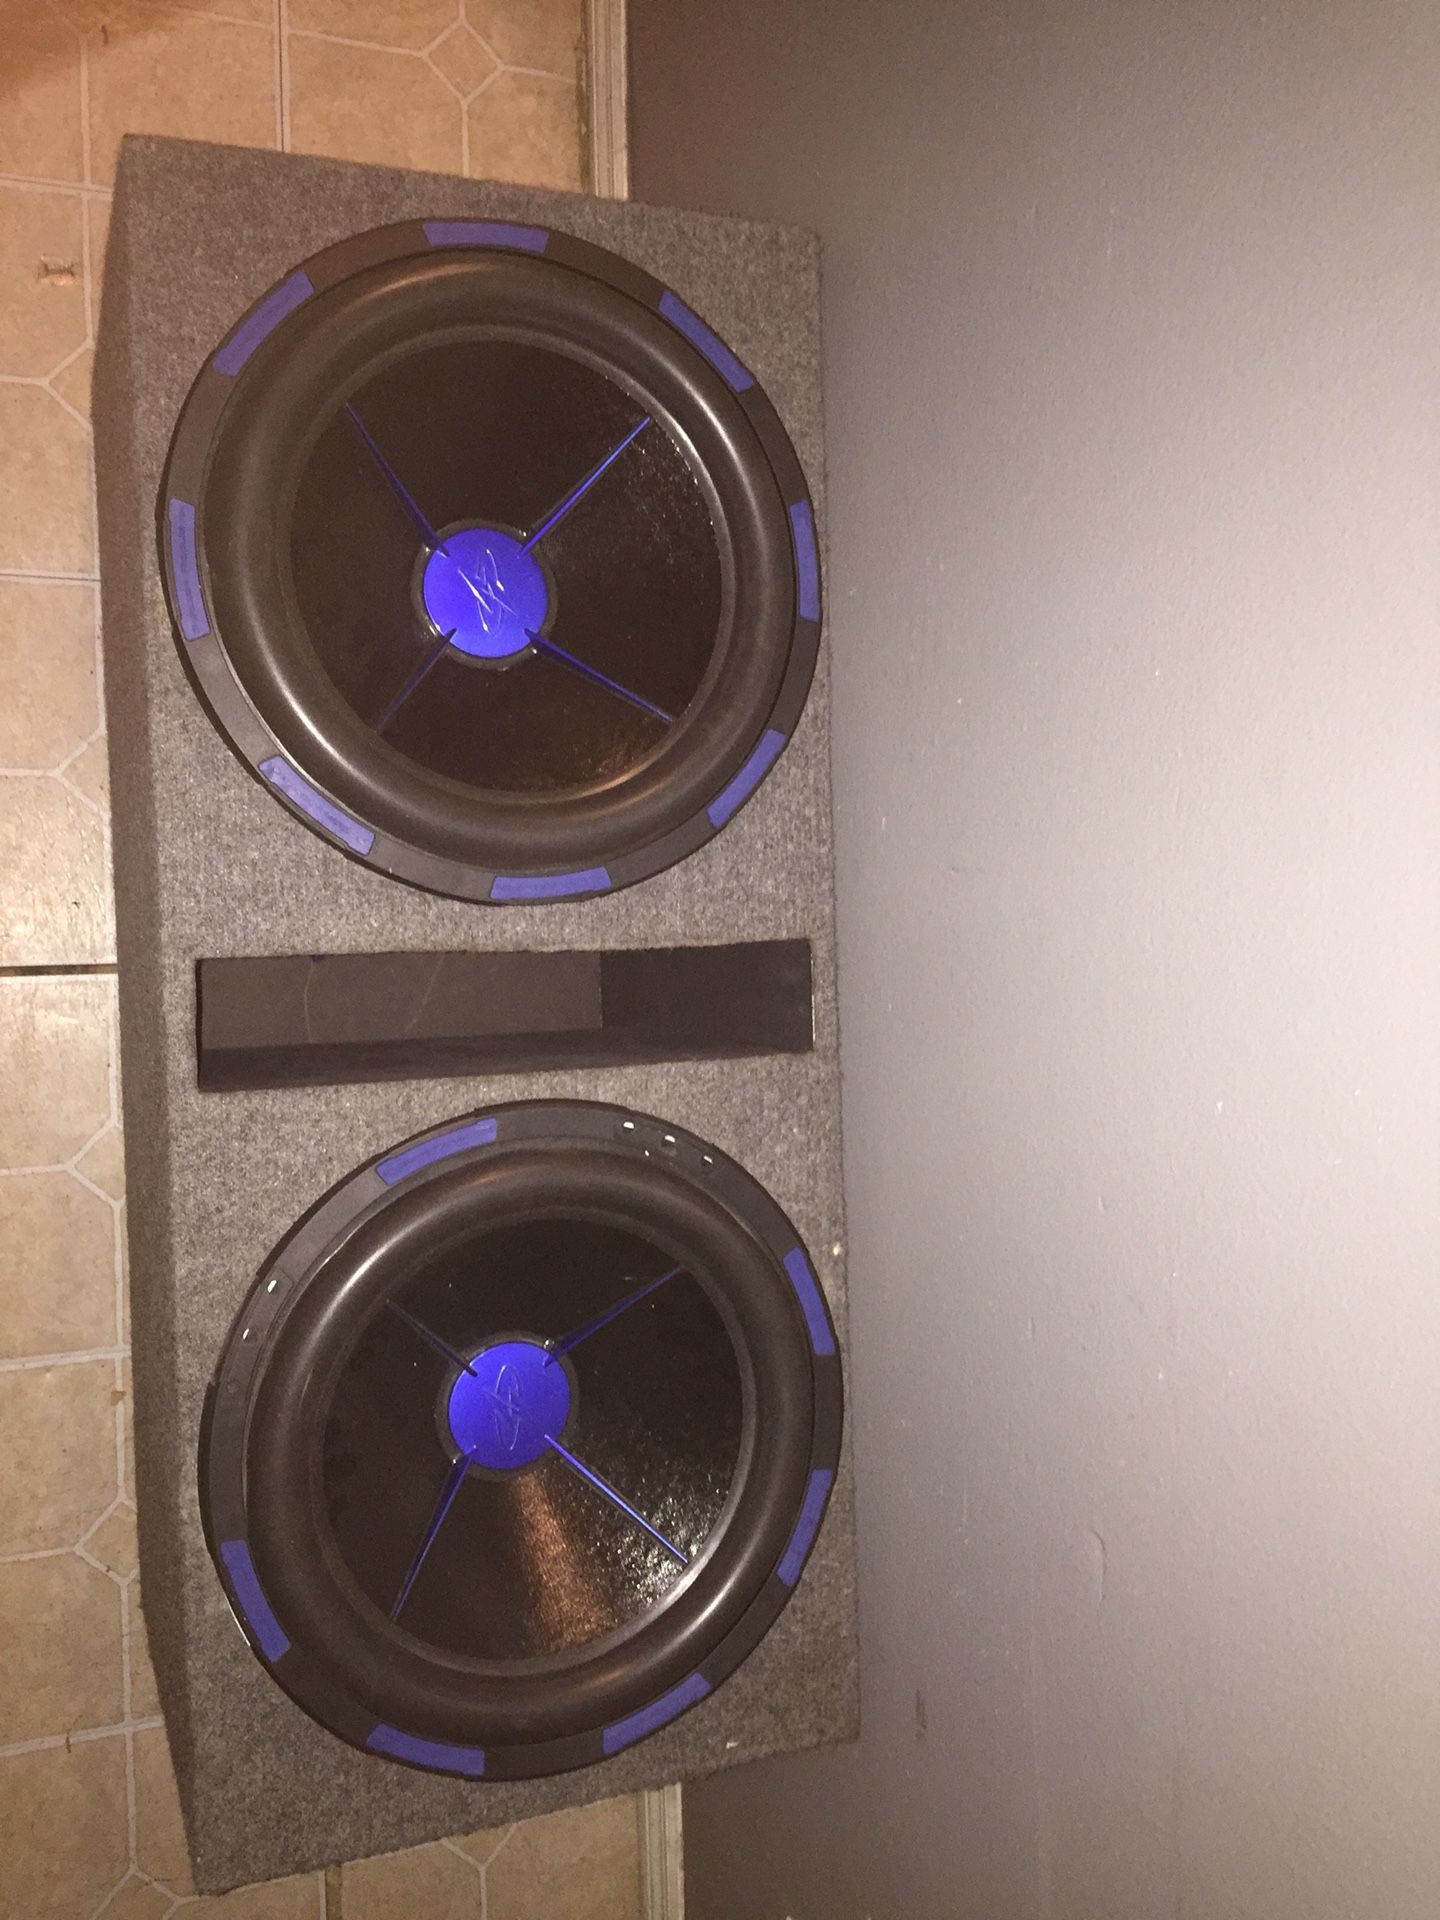 2 15 mofos subwoofer with box brand new